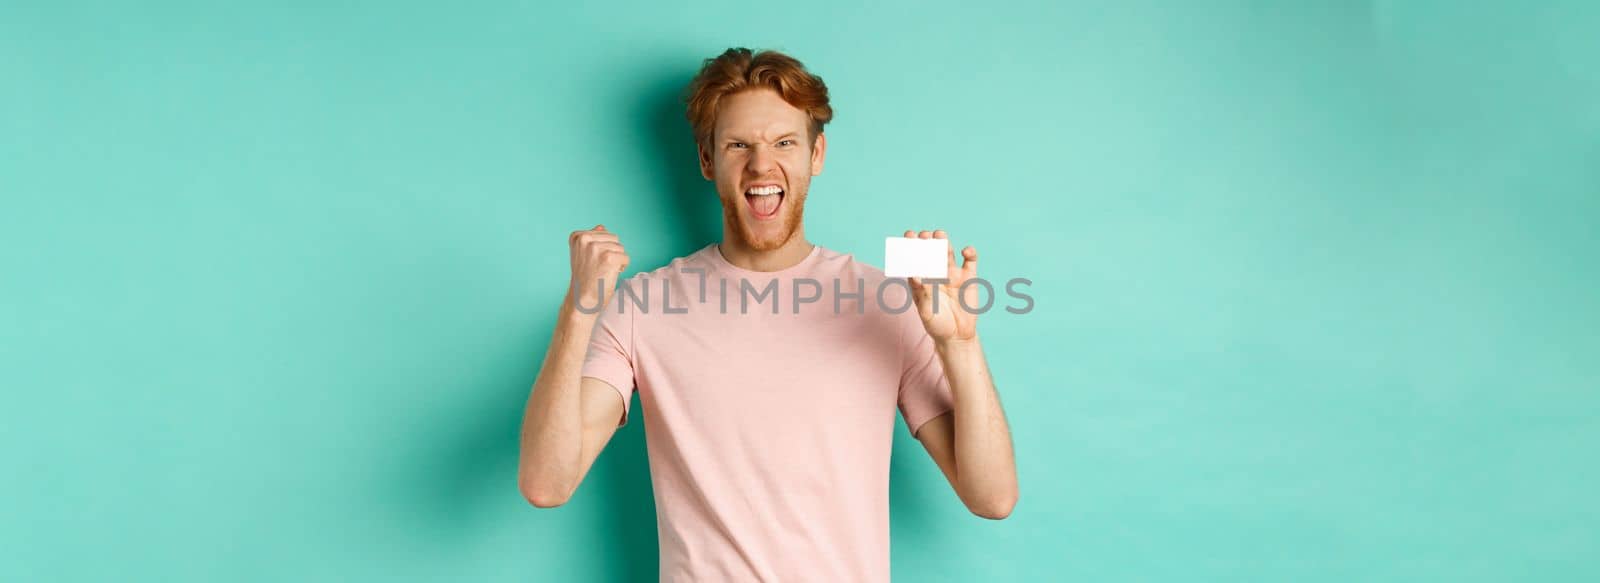 Cheerful young man triumphing, making fist pump to celebrate success, showing plastic credit card, winning prize from bank, turquoise background.